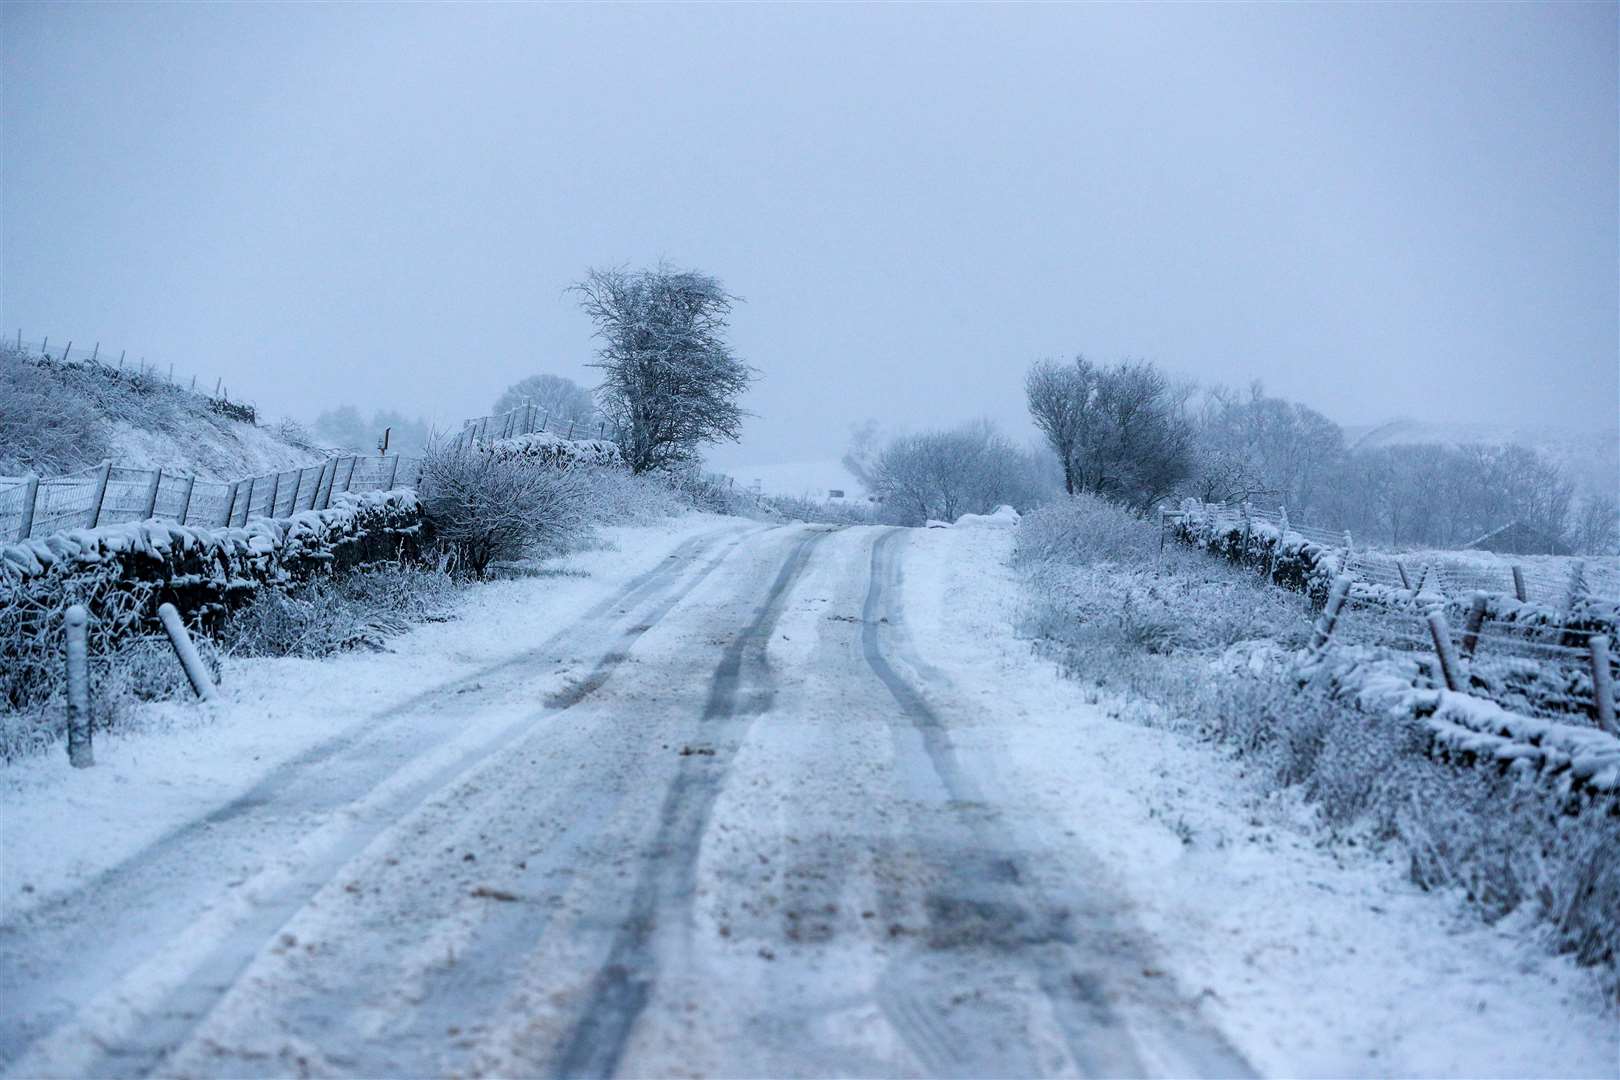 UK braces for wintry December weather amid snow and ice warnings